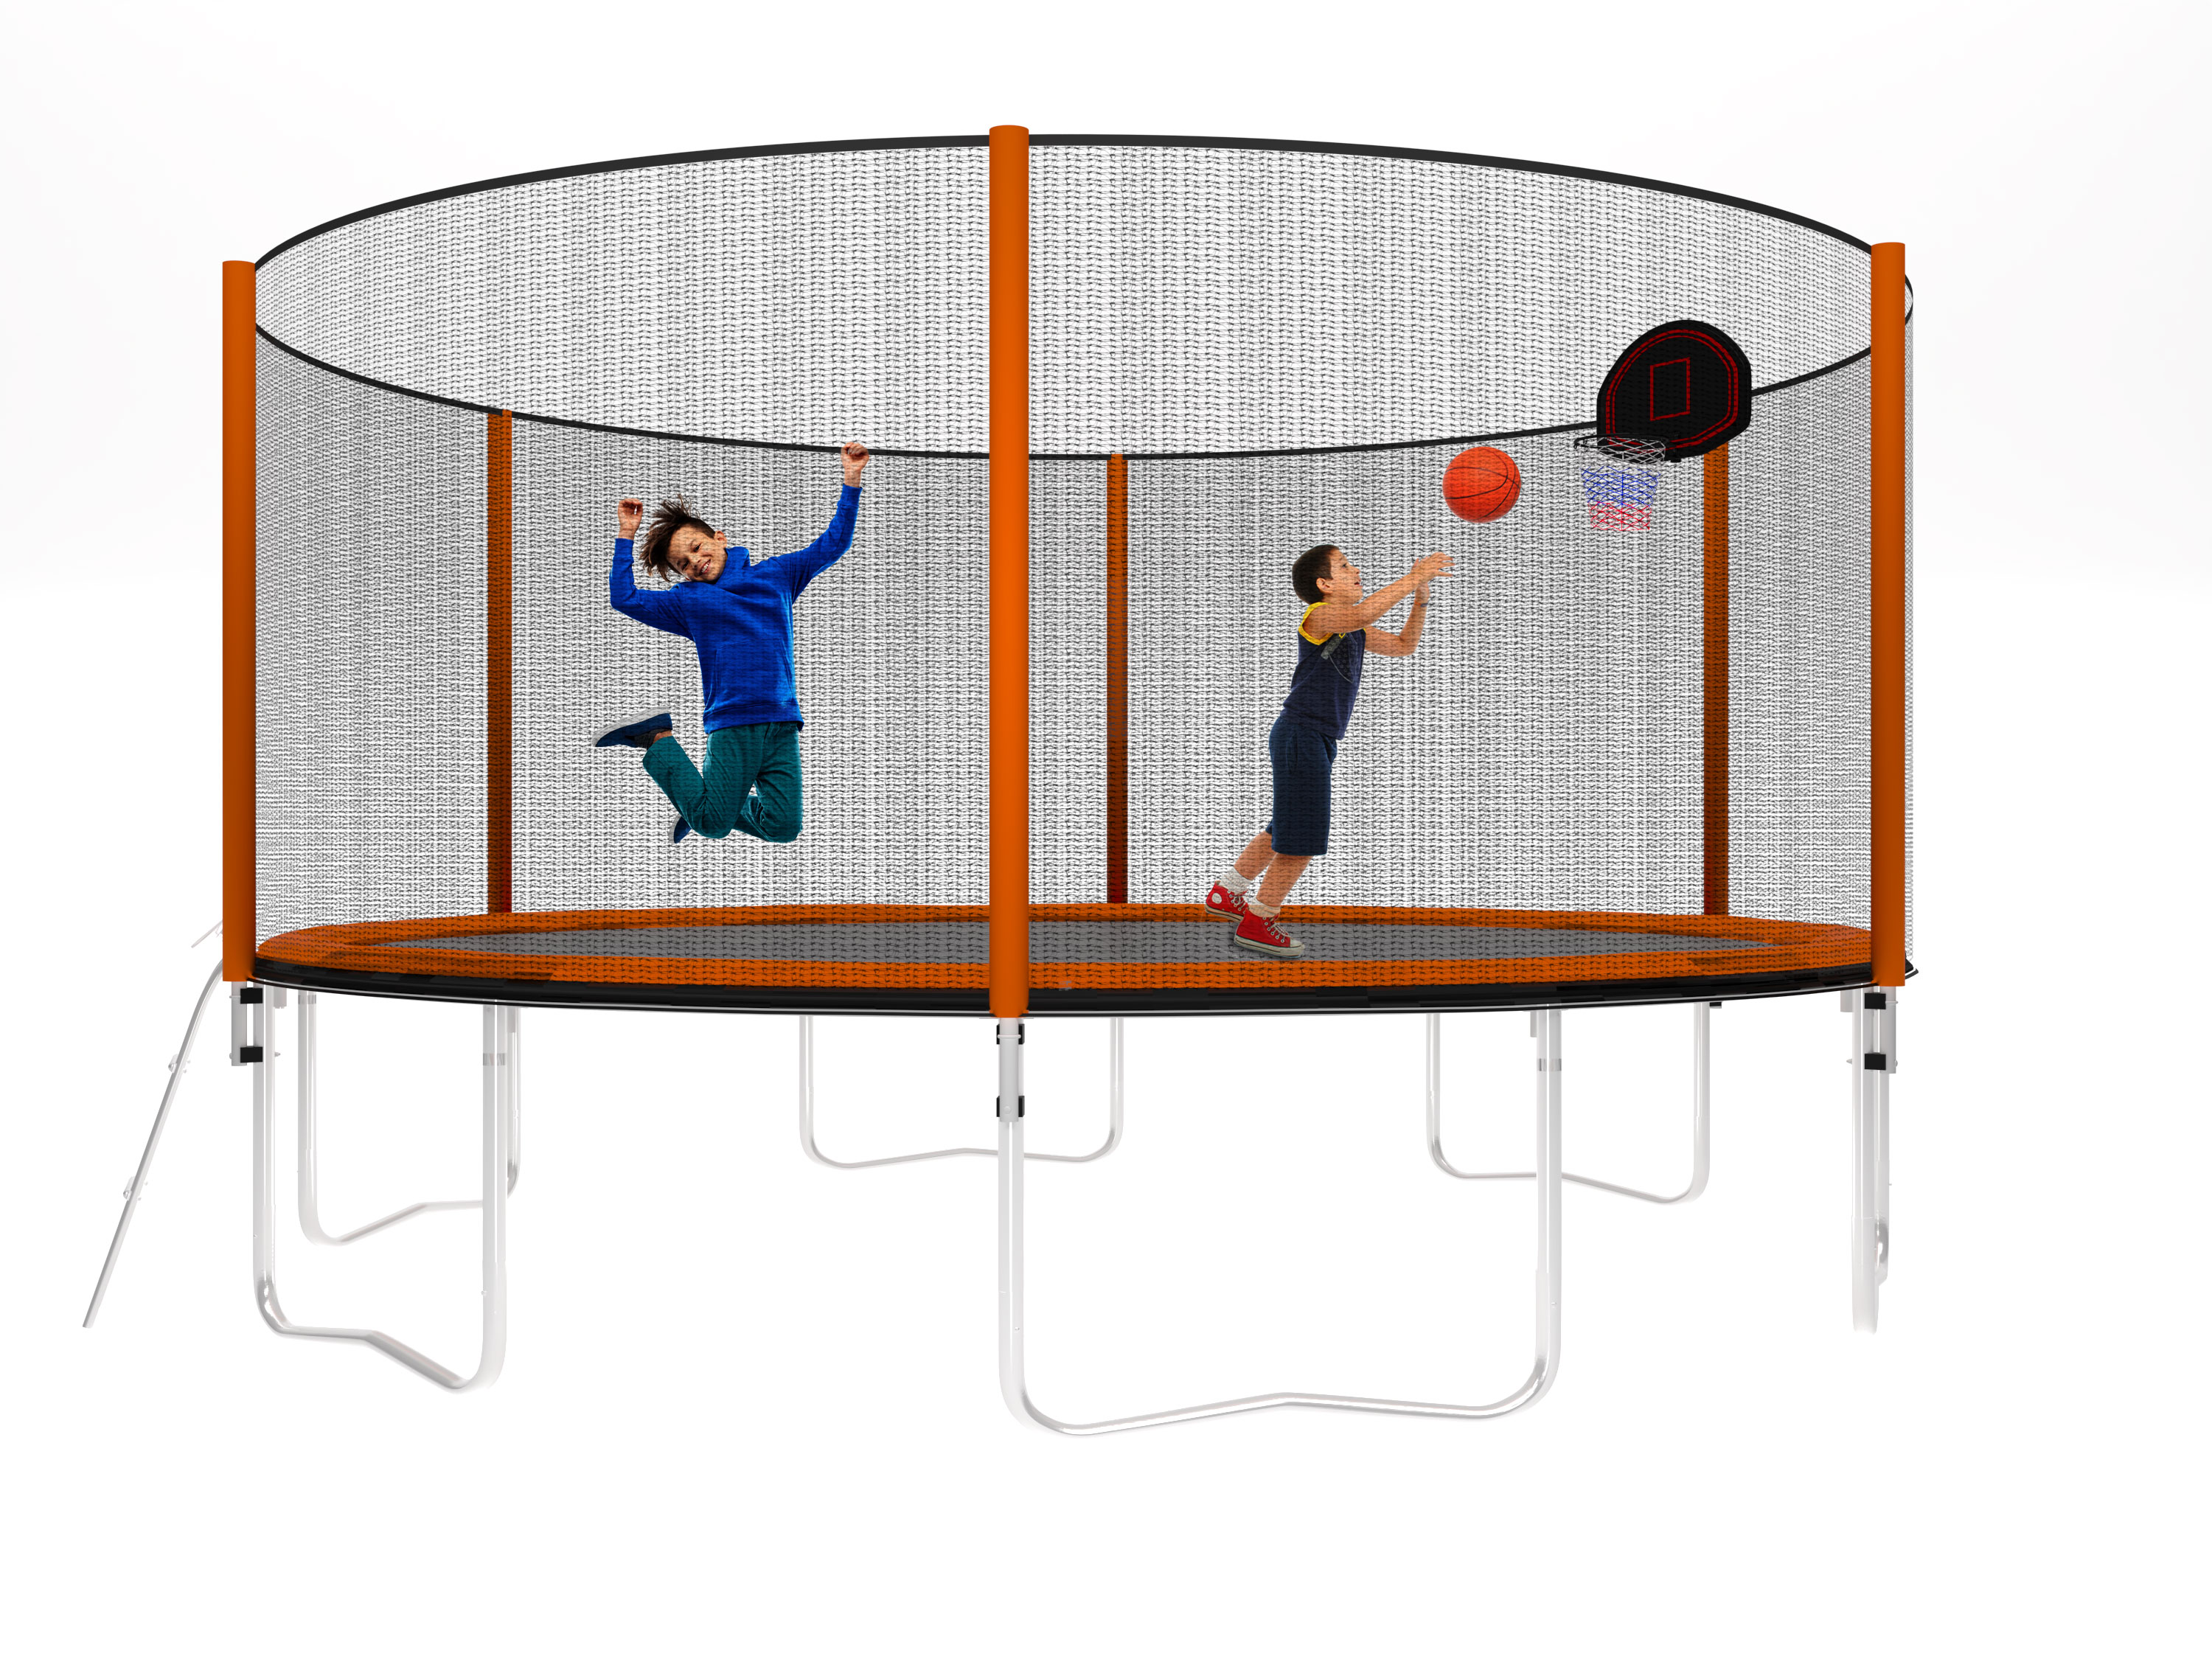 14FT Powder-coated Advanced Trampoline with Basketball Hoop Inflator and Ladder(Outer Safety Enclosure) Orange-Boyel Living